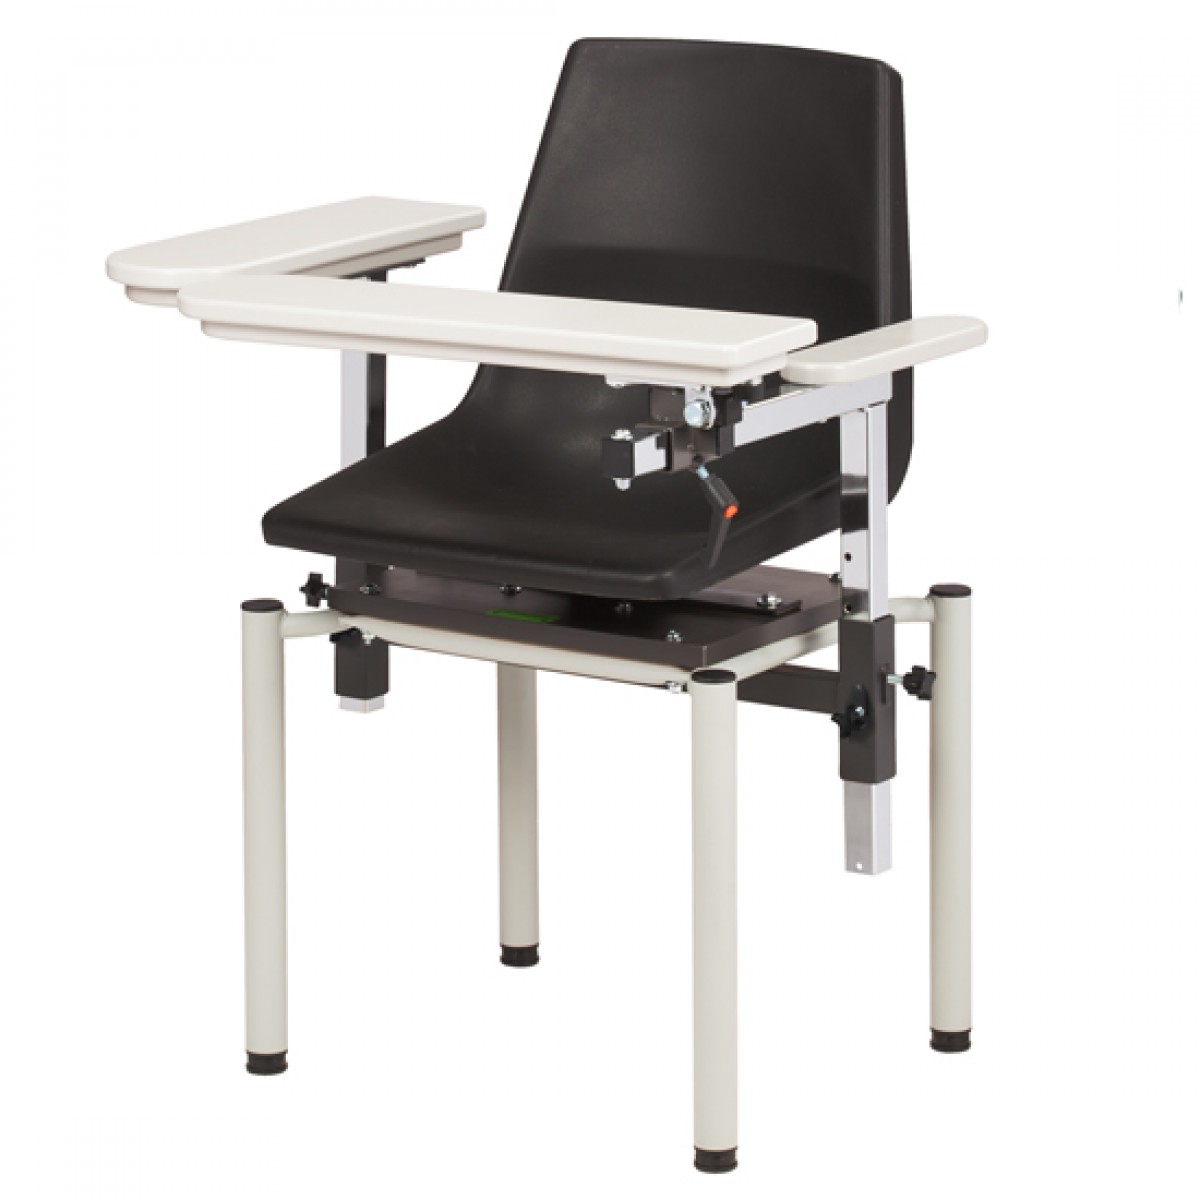 Hospital Phlebotomy Chairs, Clinton Blood Drawing Chair